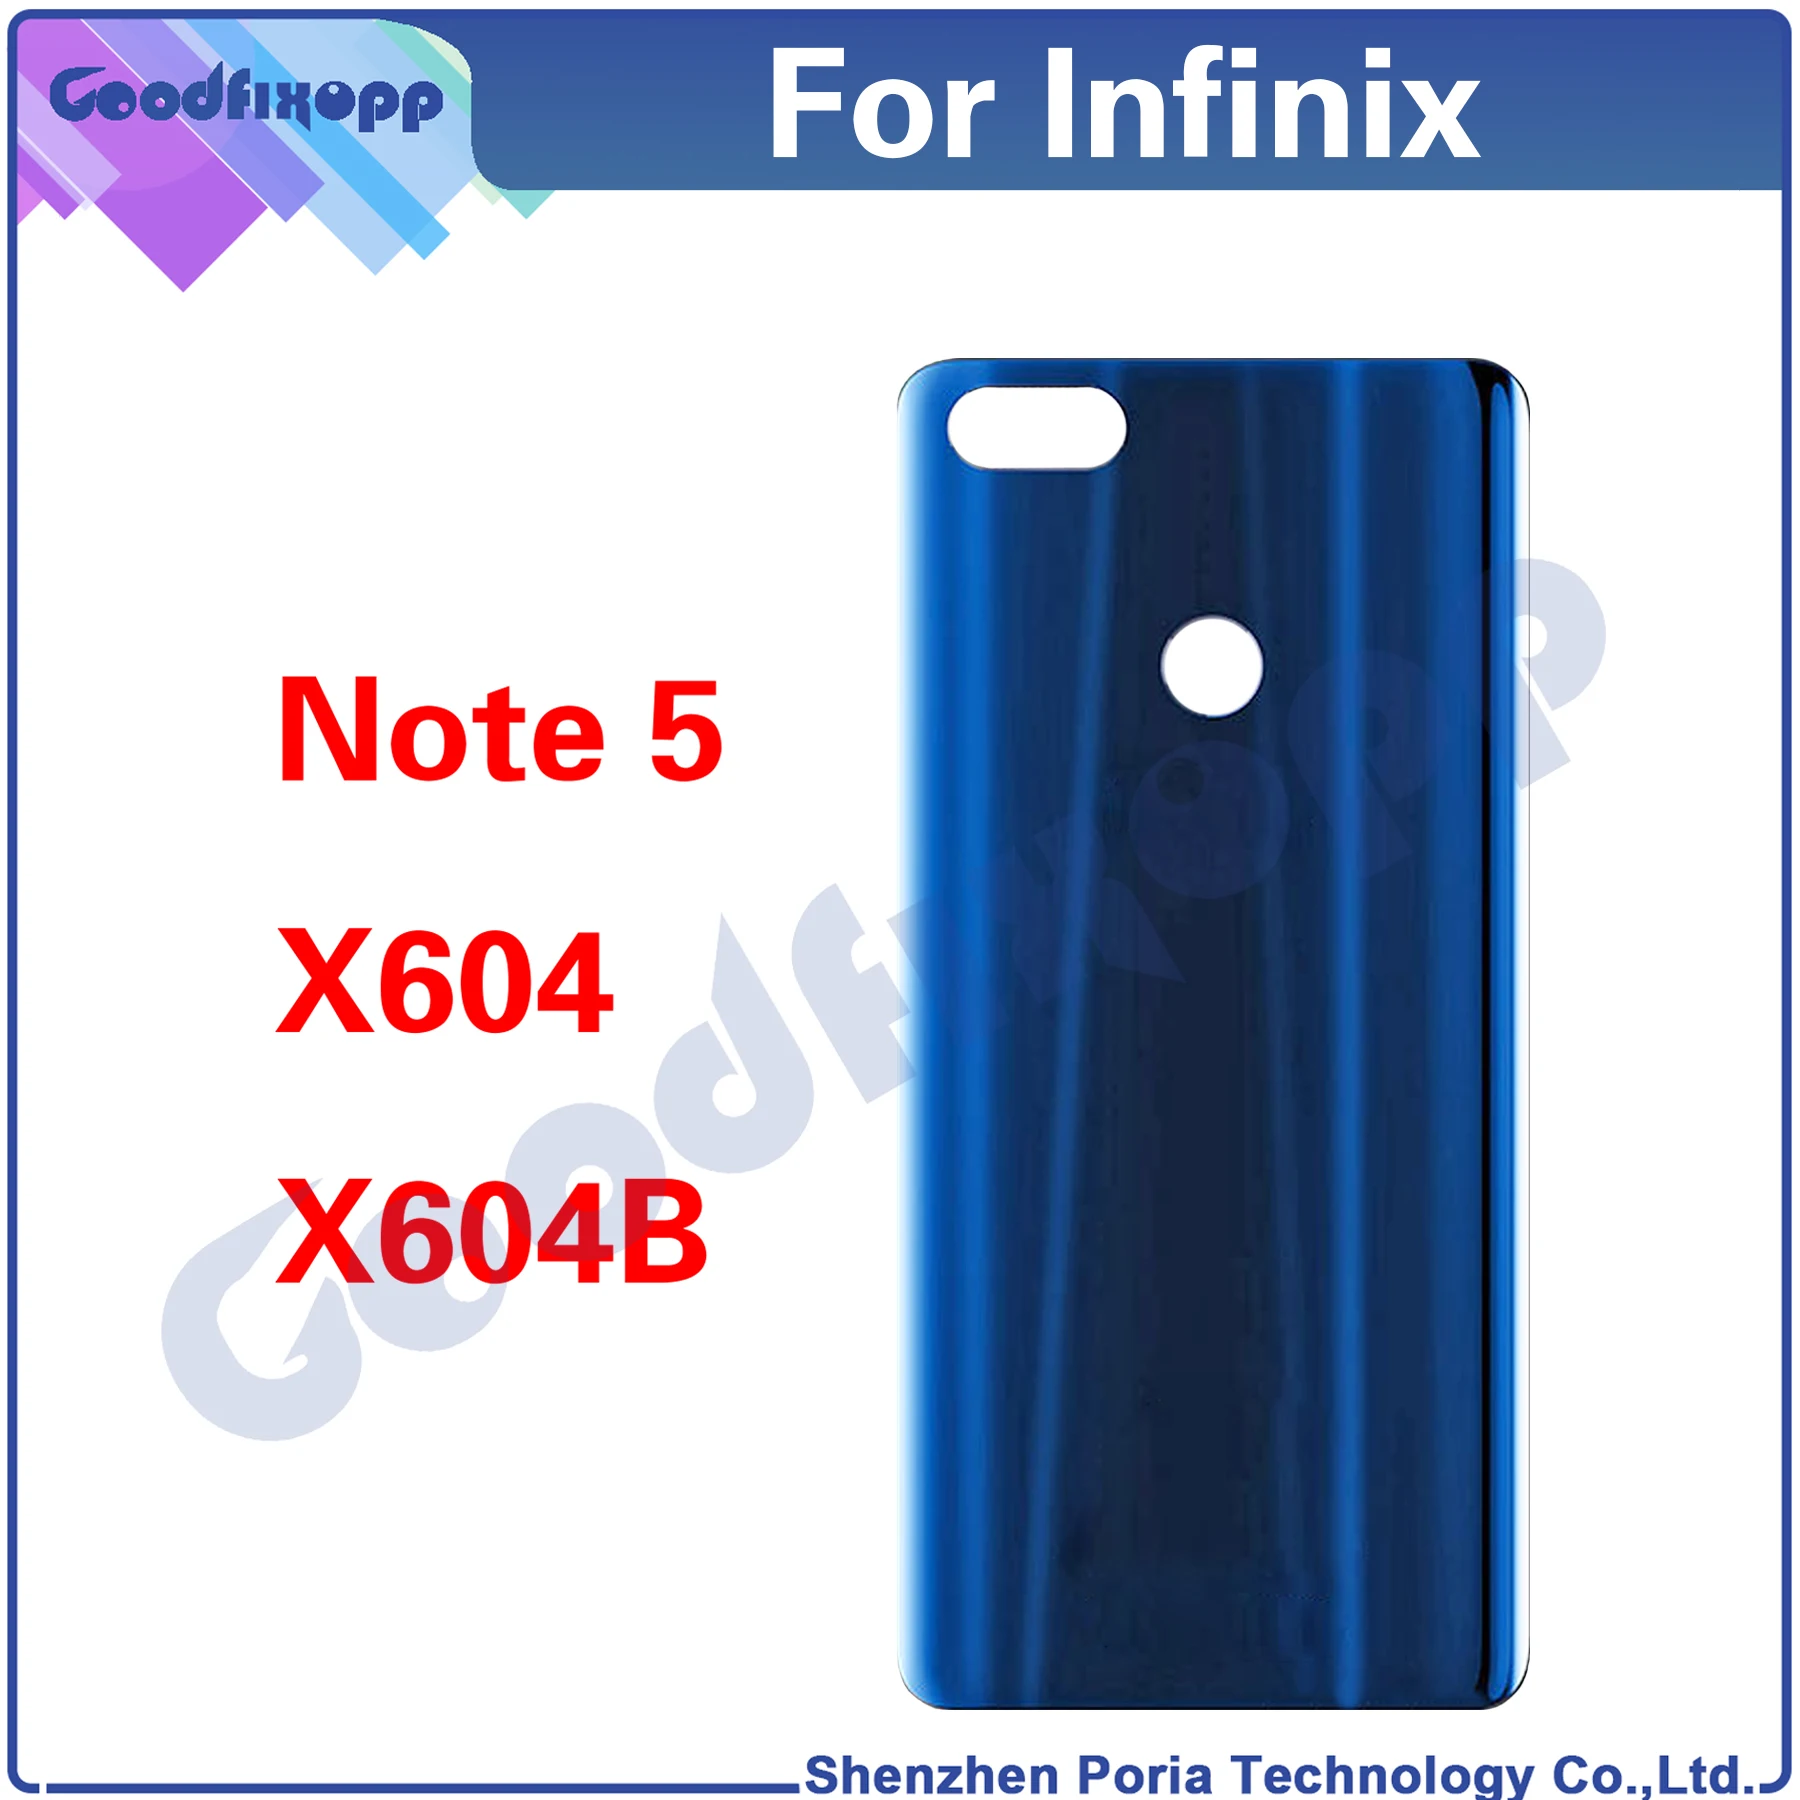 

10PCS For Infinix Note 5 X604 X604B Note5 Rear Case Battery Back Cover Door Housing Repair Parts Replacement